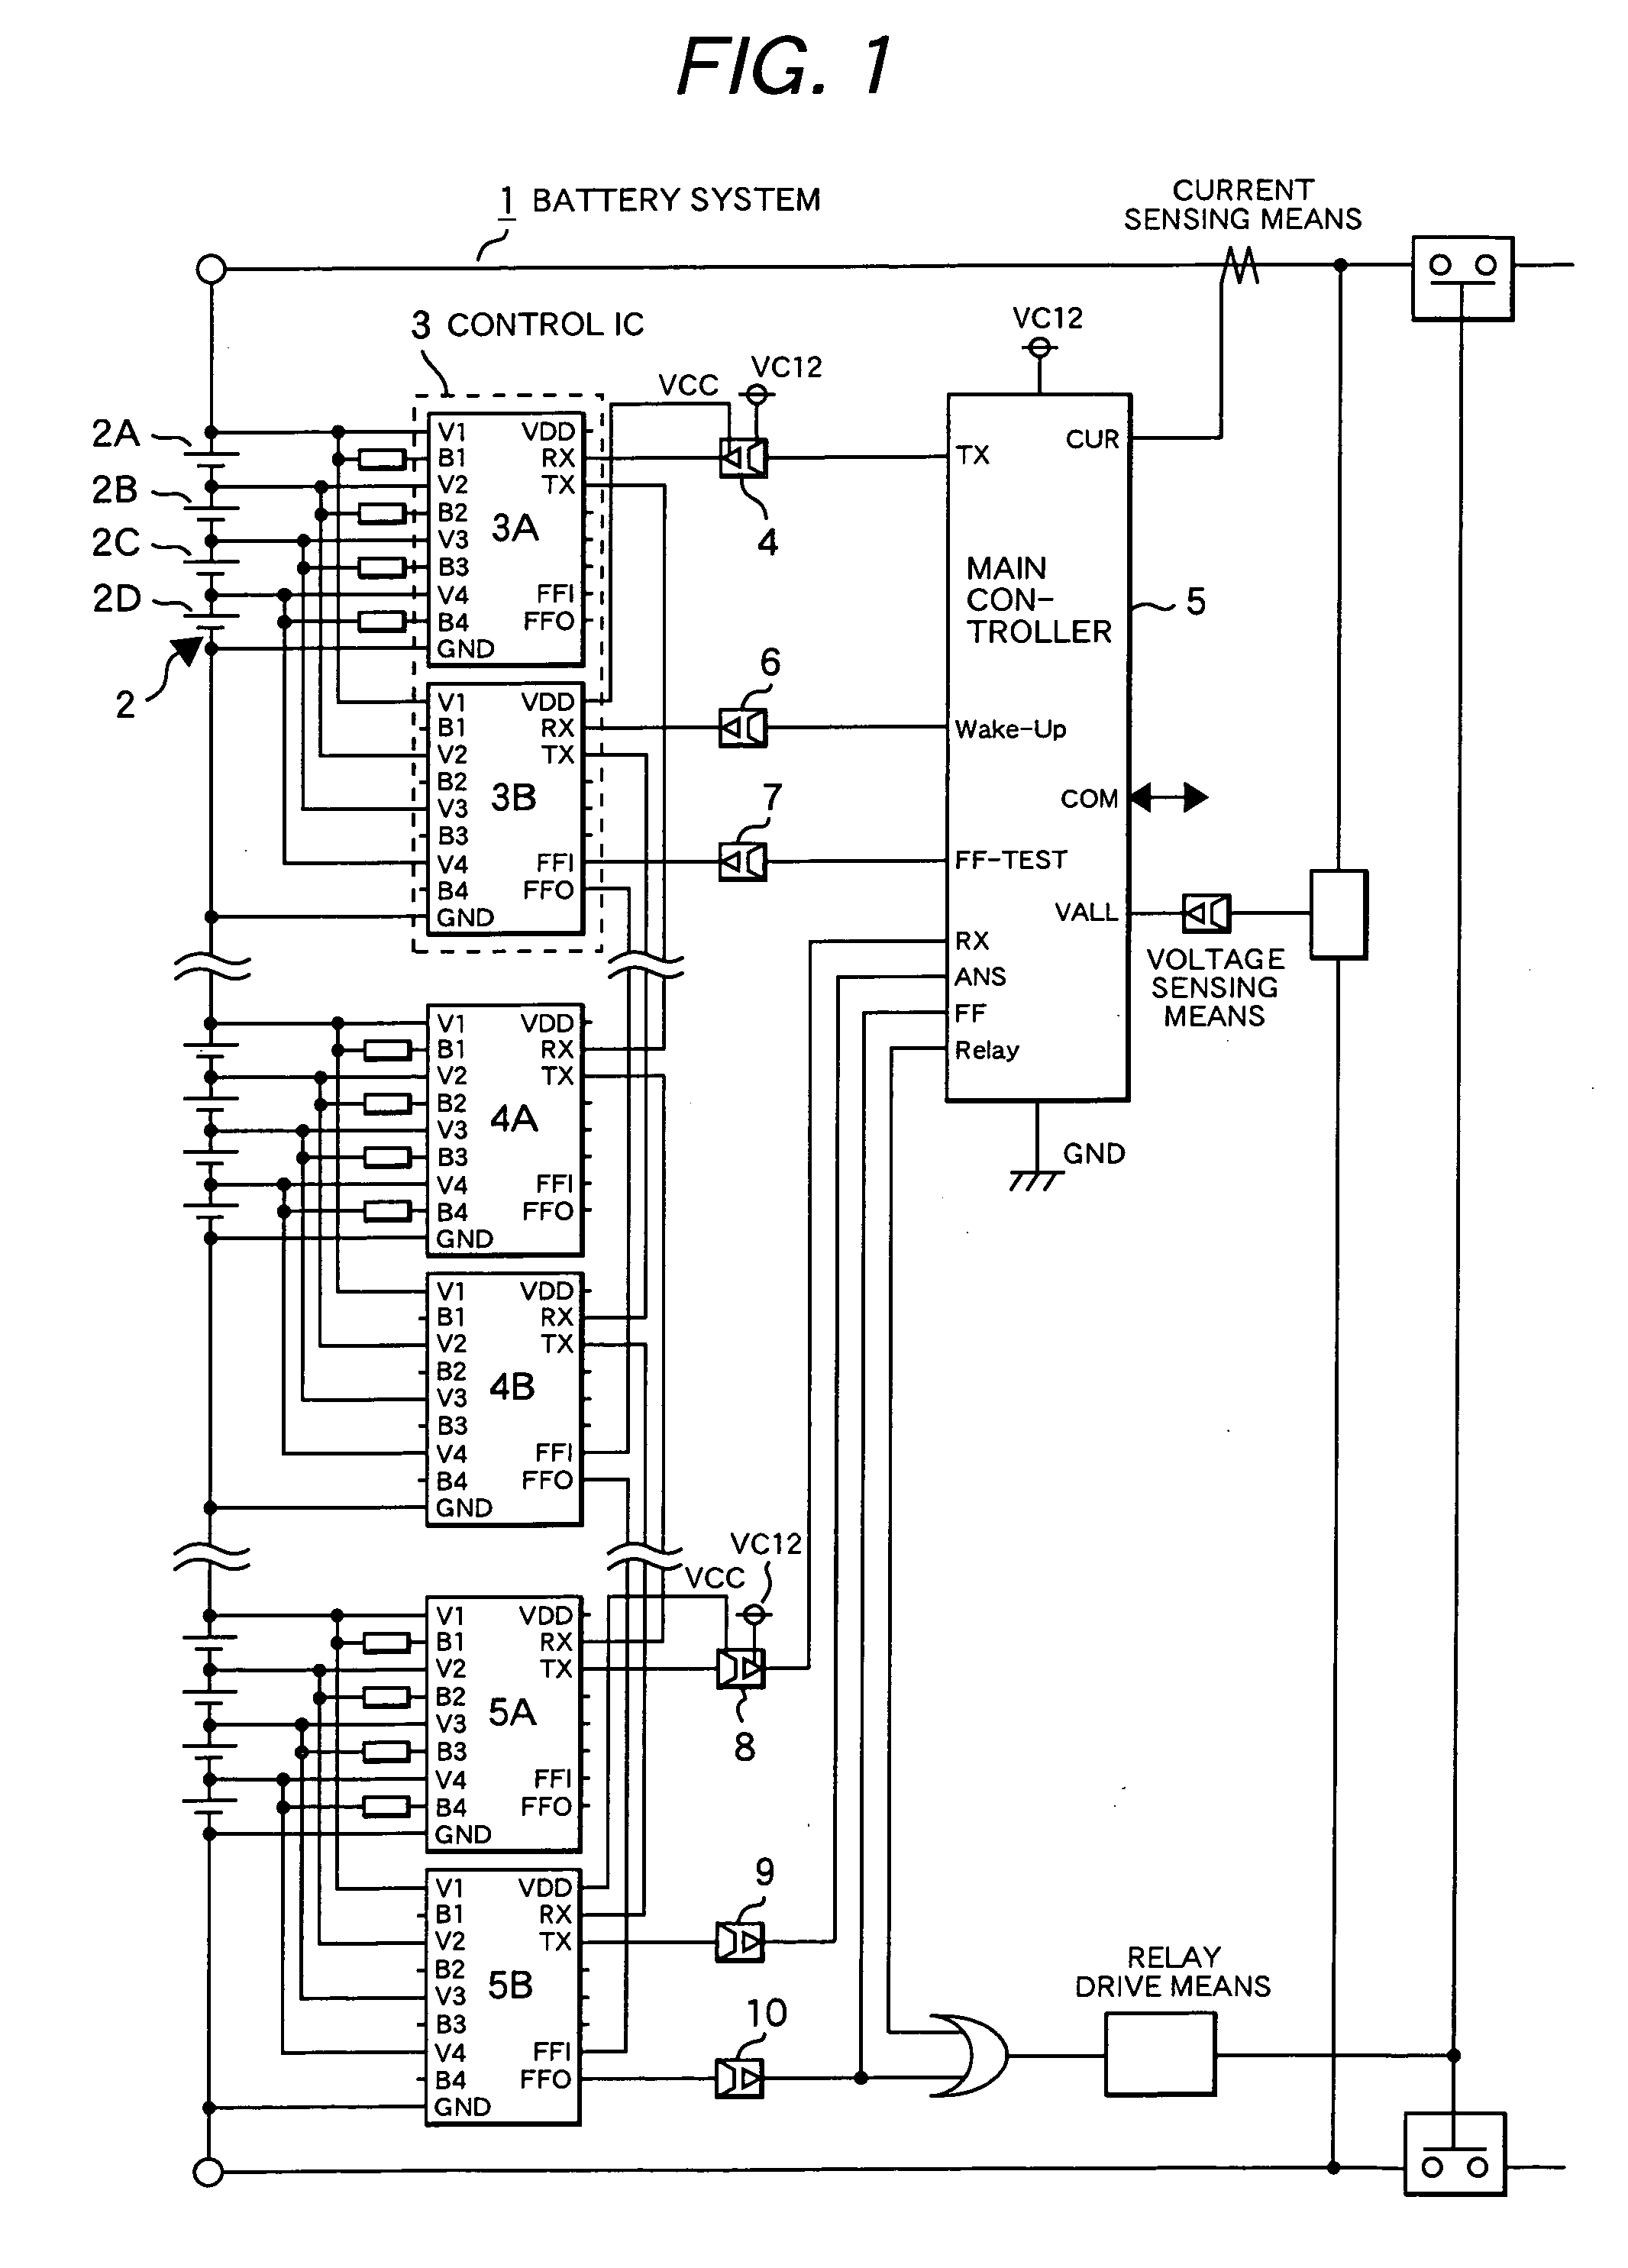 Multi-series battery control system